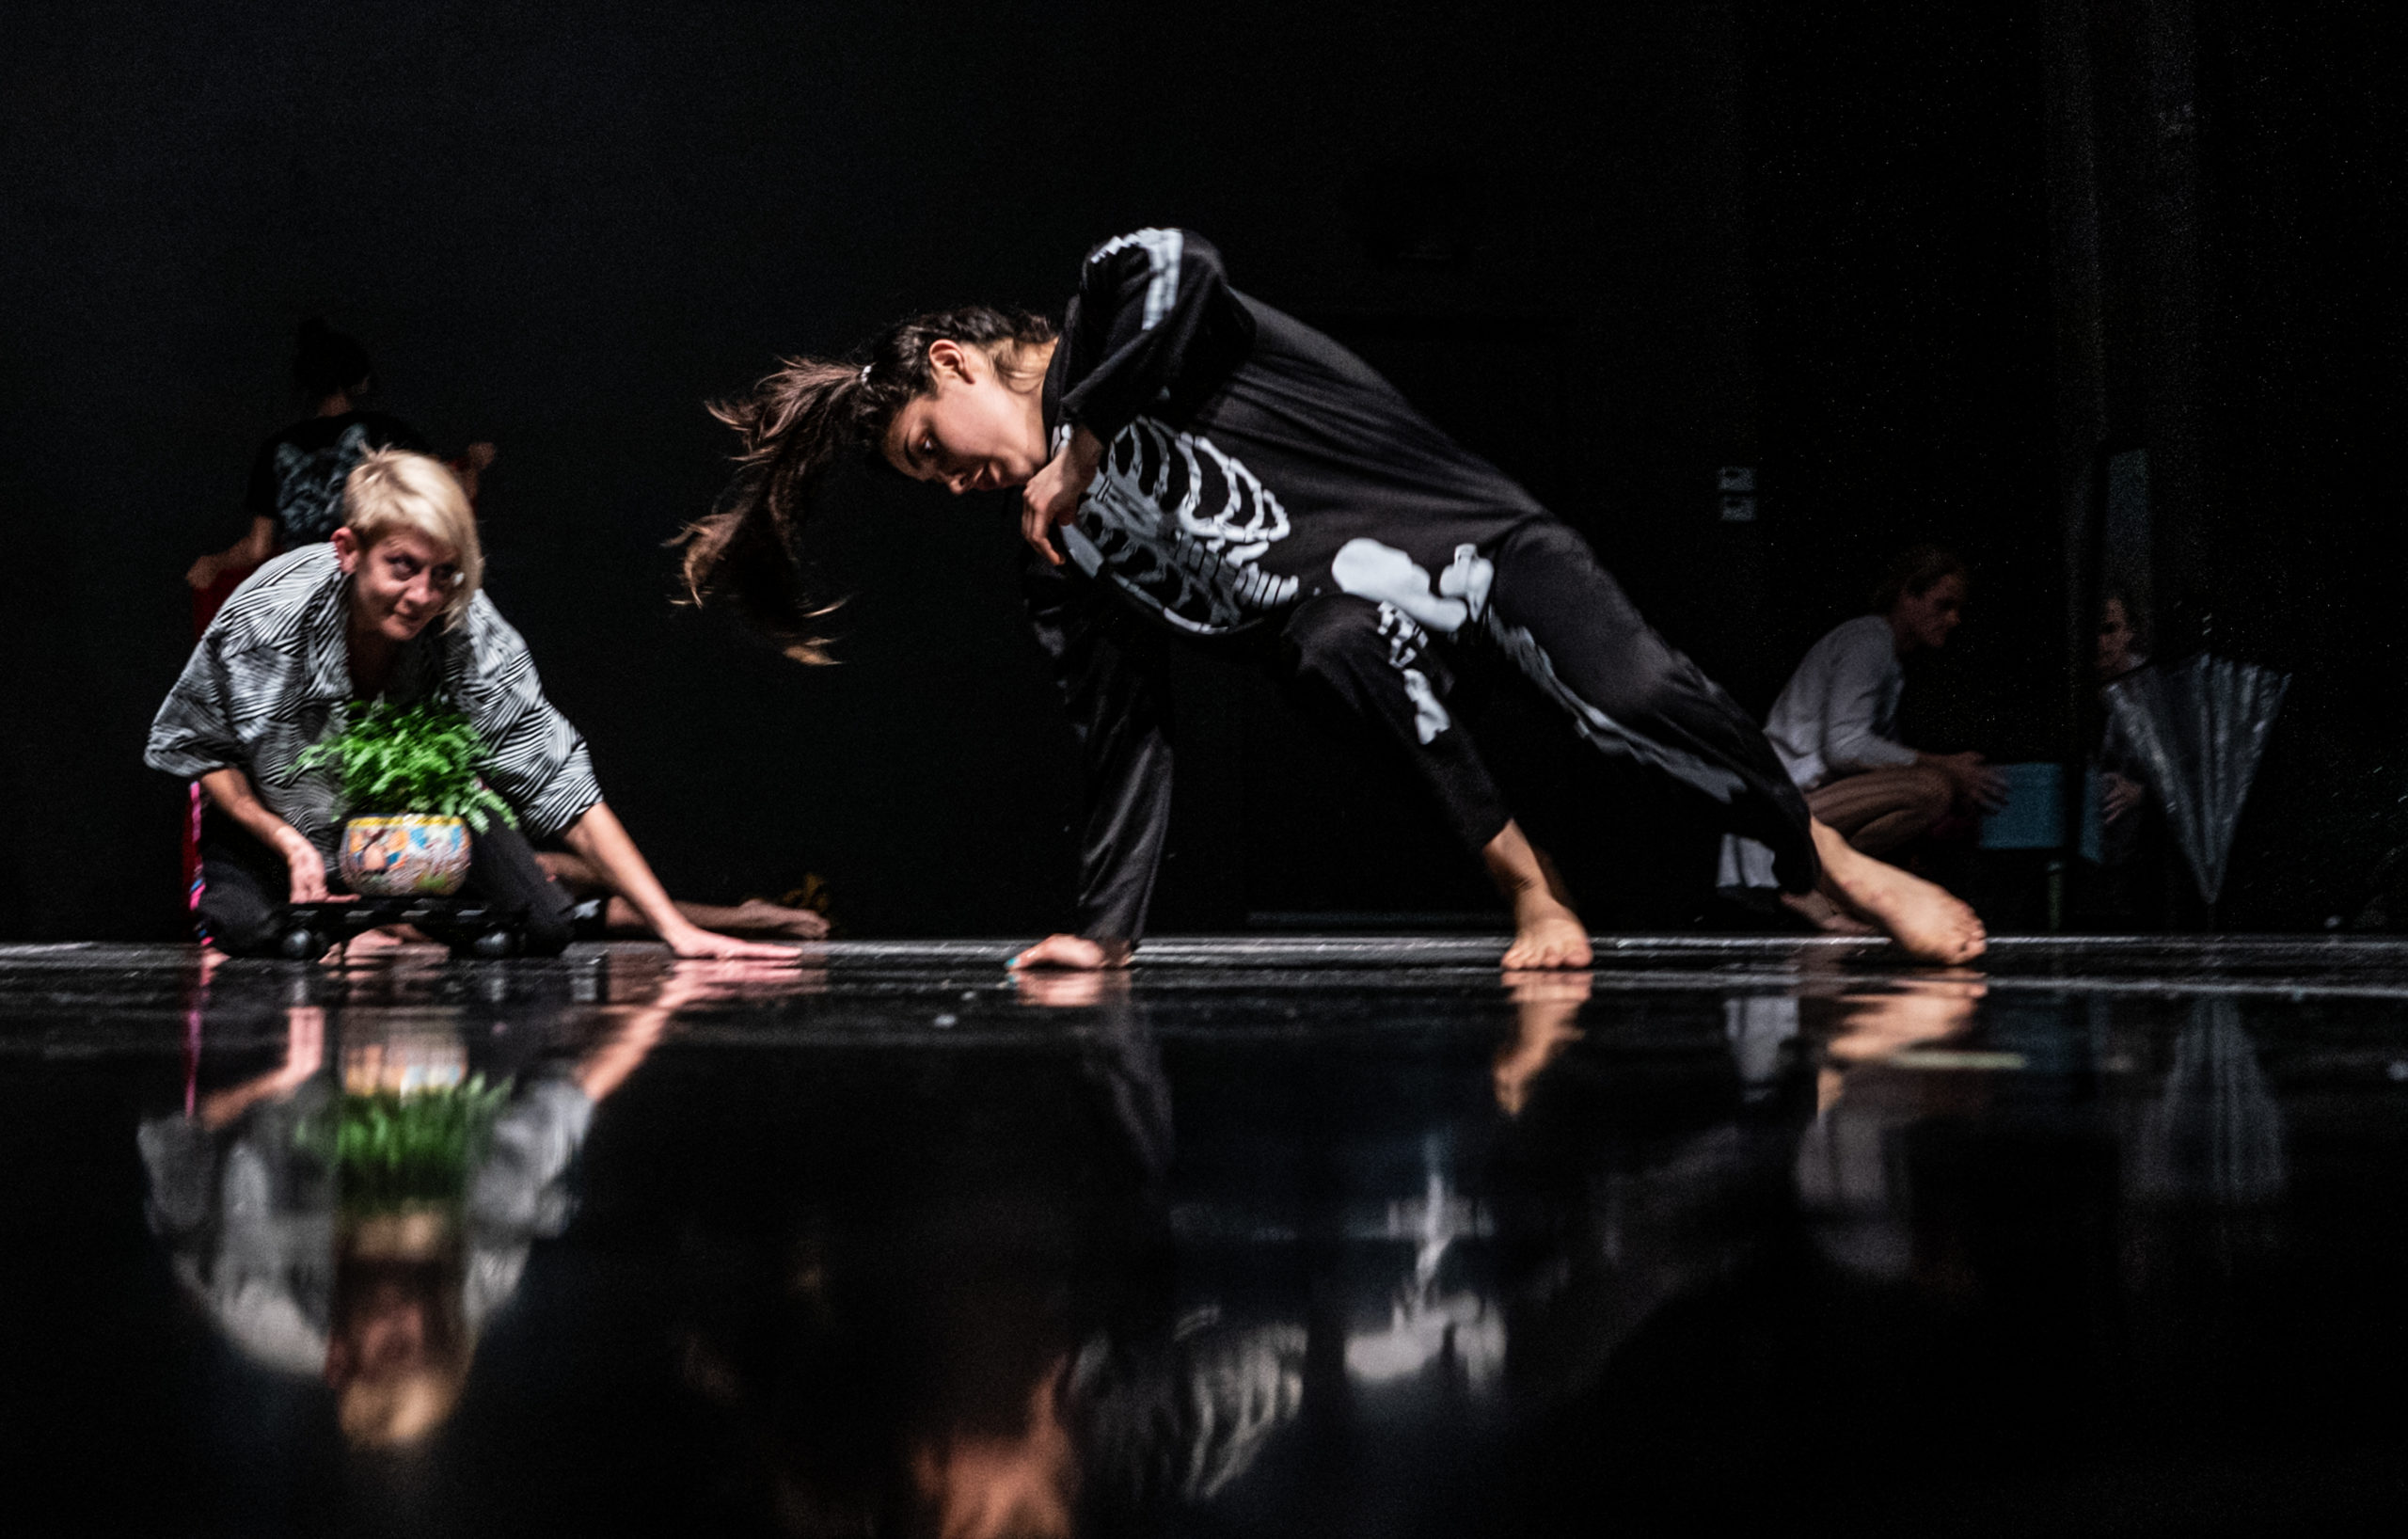 Kathleen Hermesdorf and gizeh perform "Reckoning" at FRESH Festival 2019